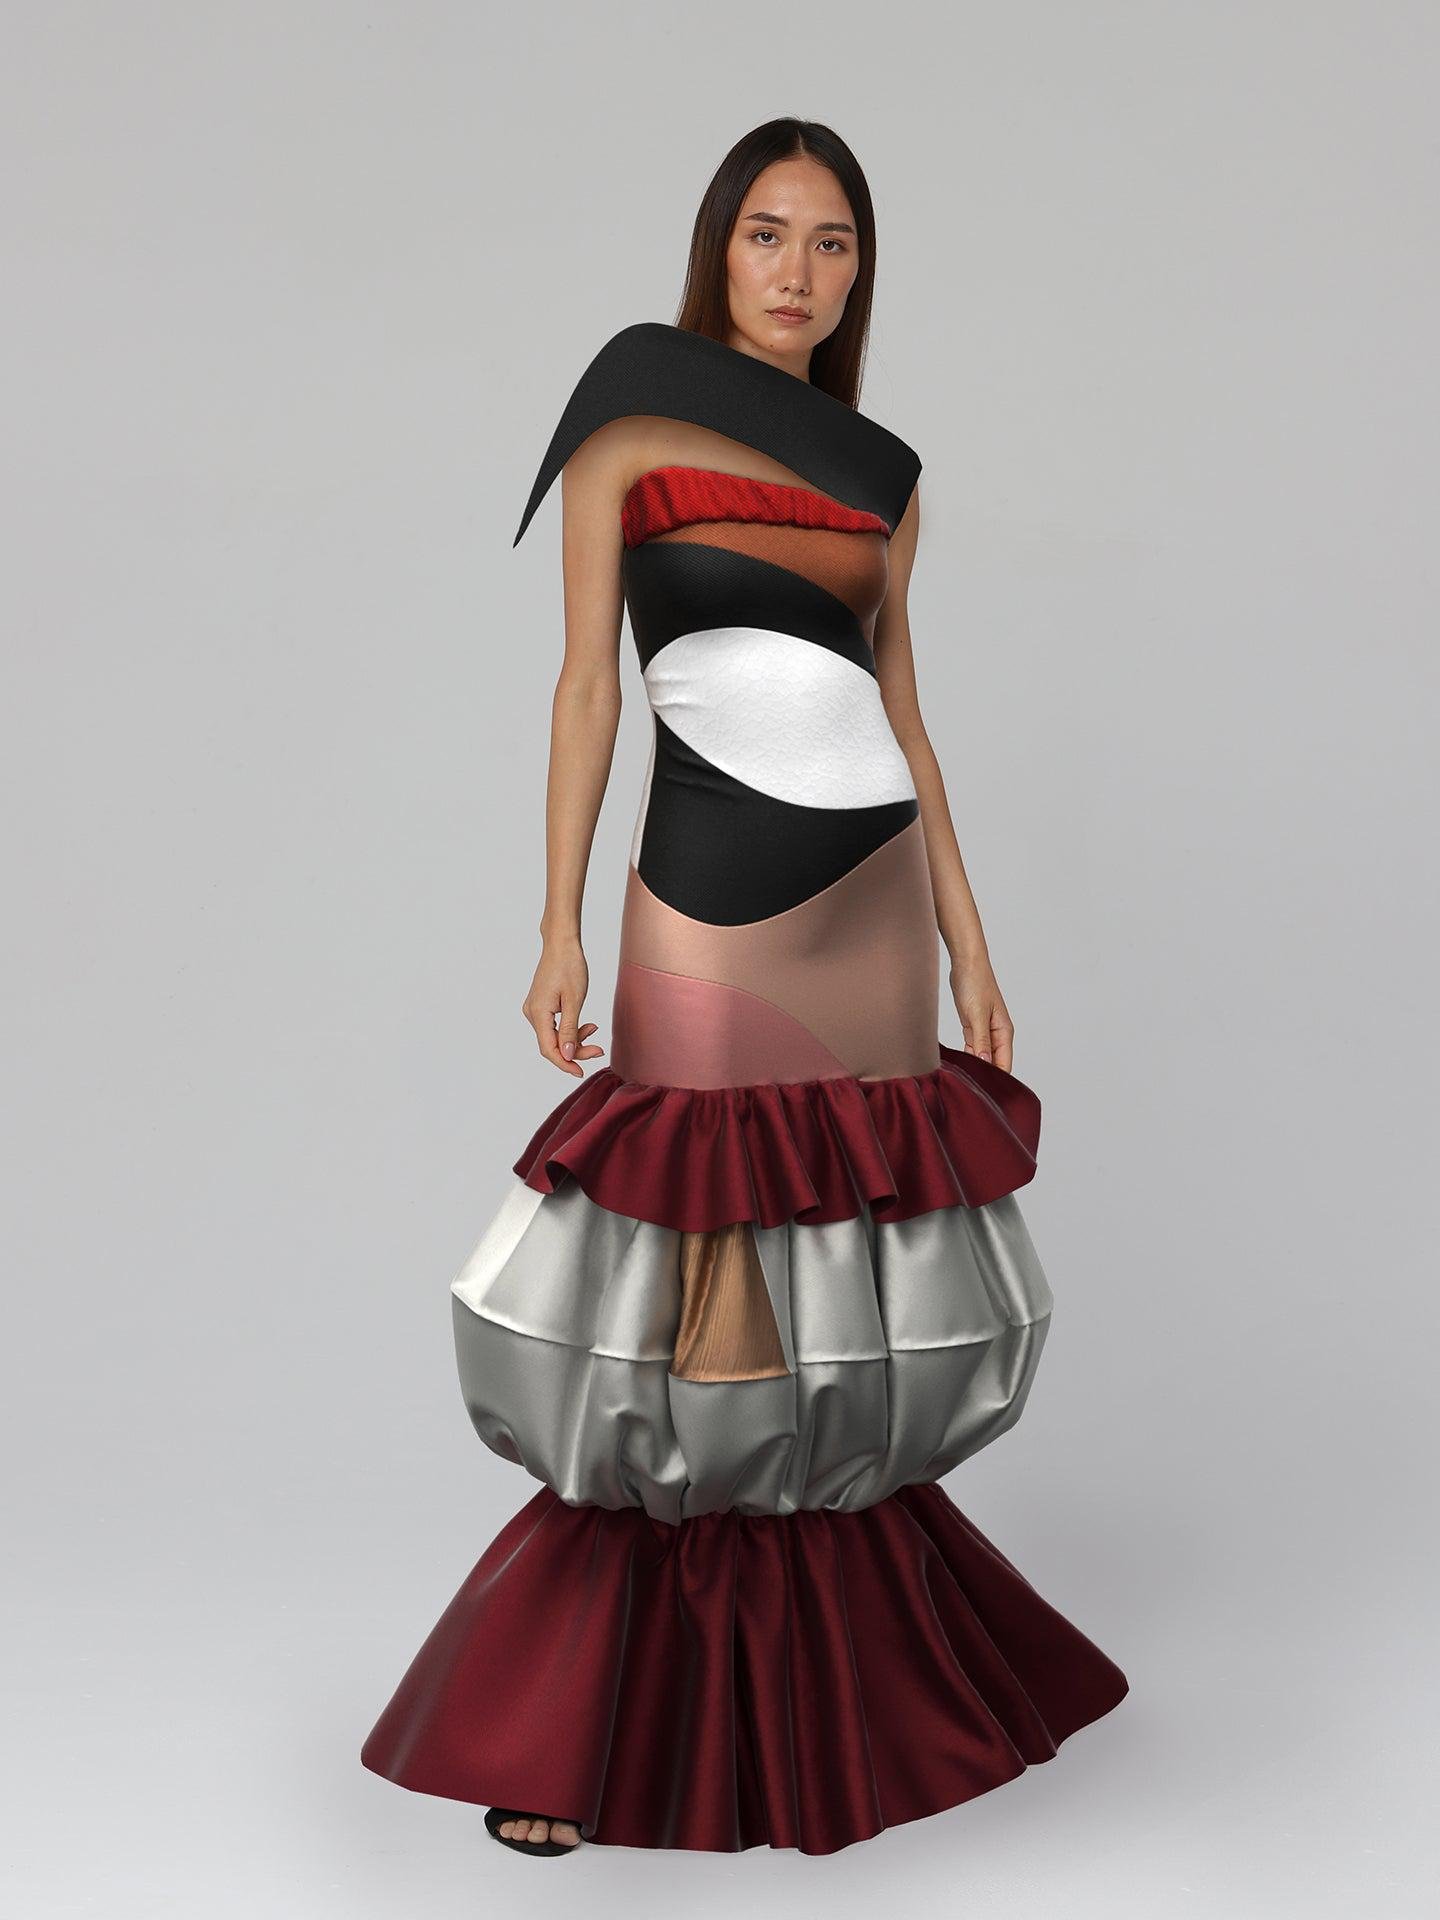 Abstract face gown by DRESSX DRAG METAVERSE